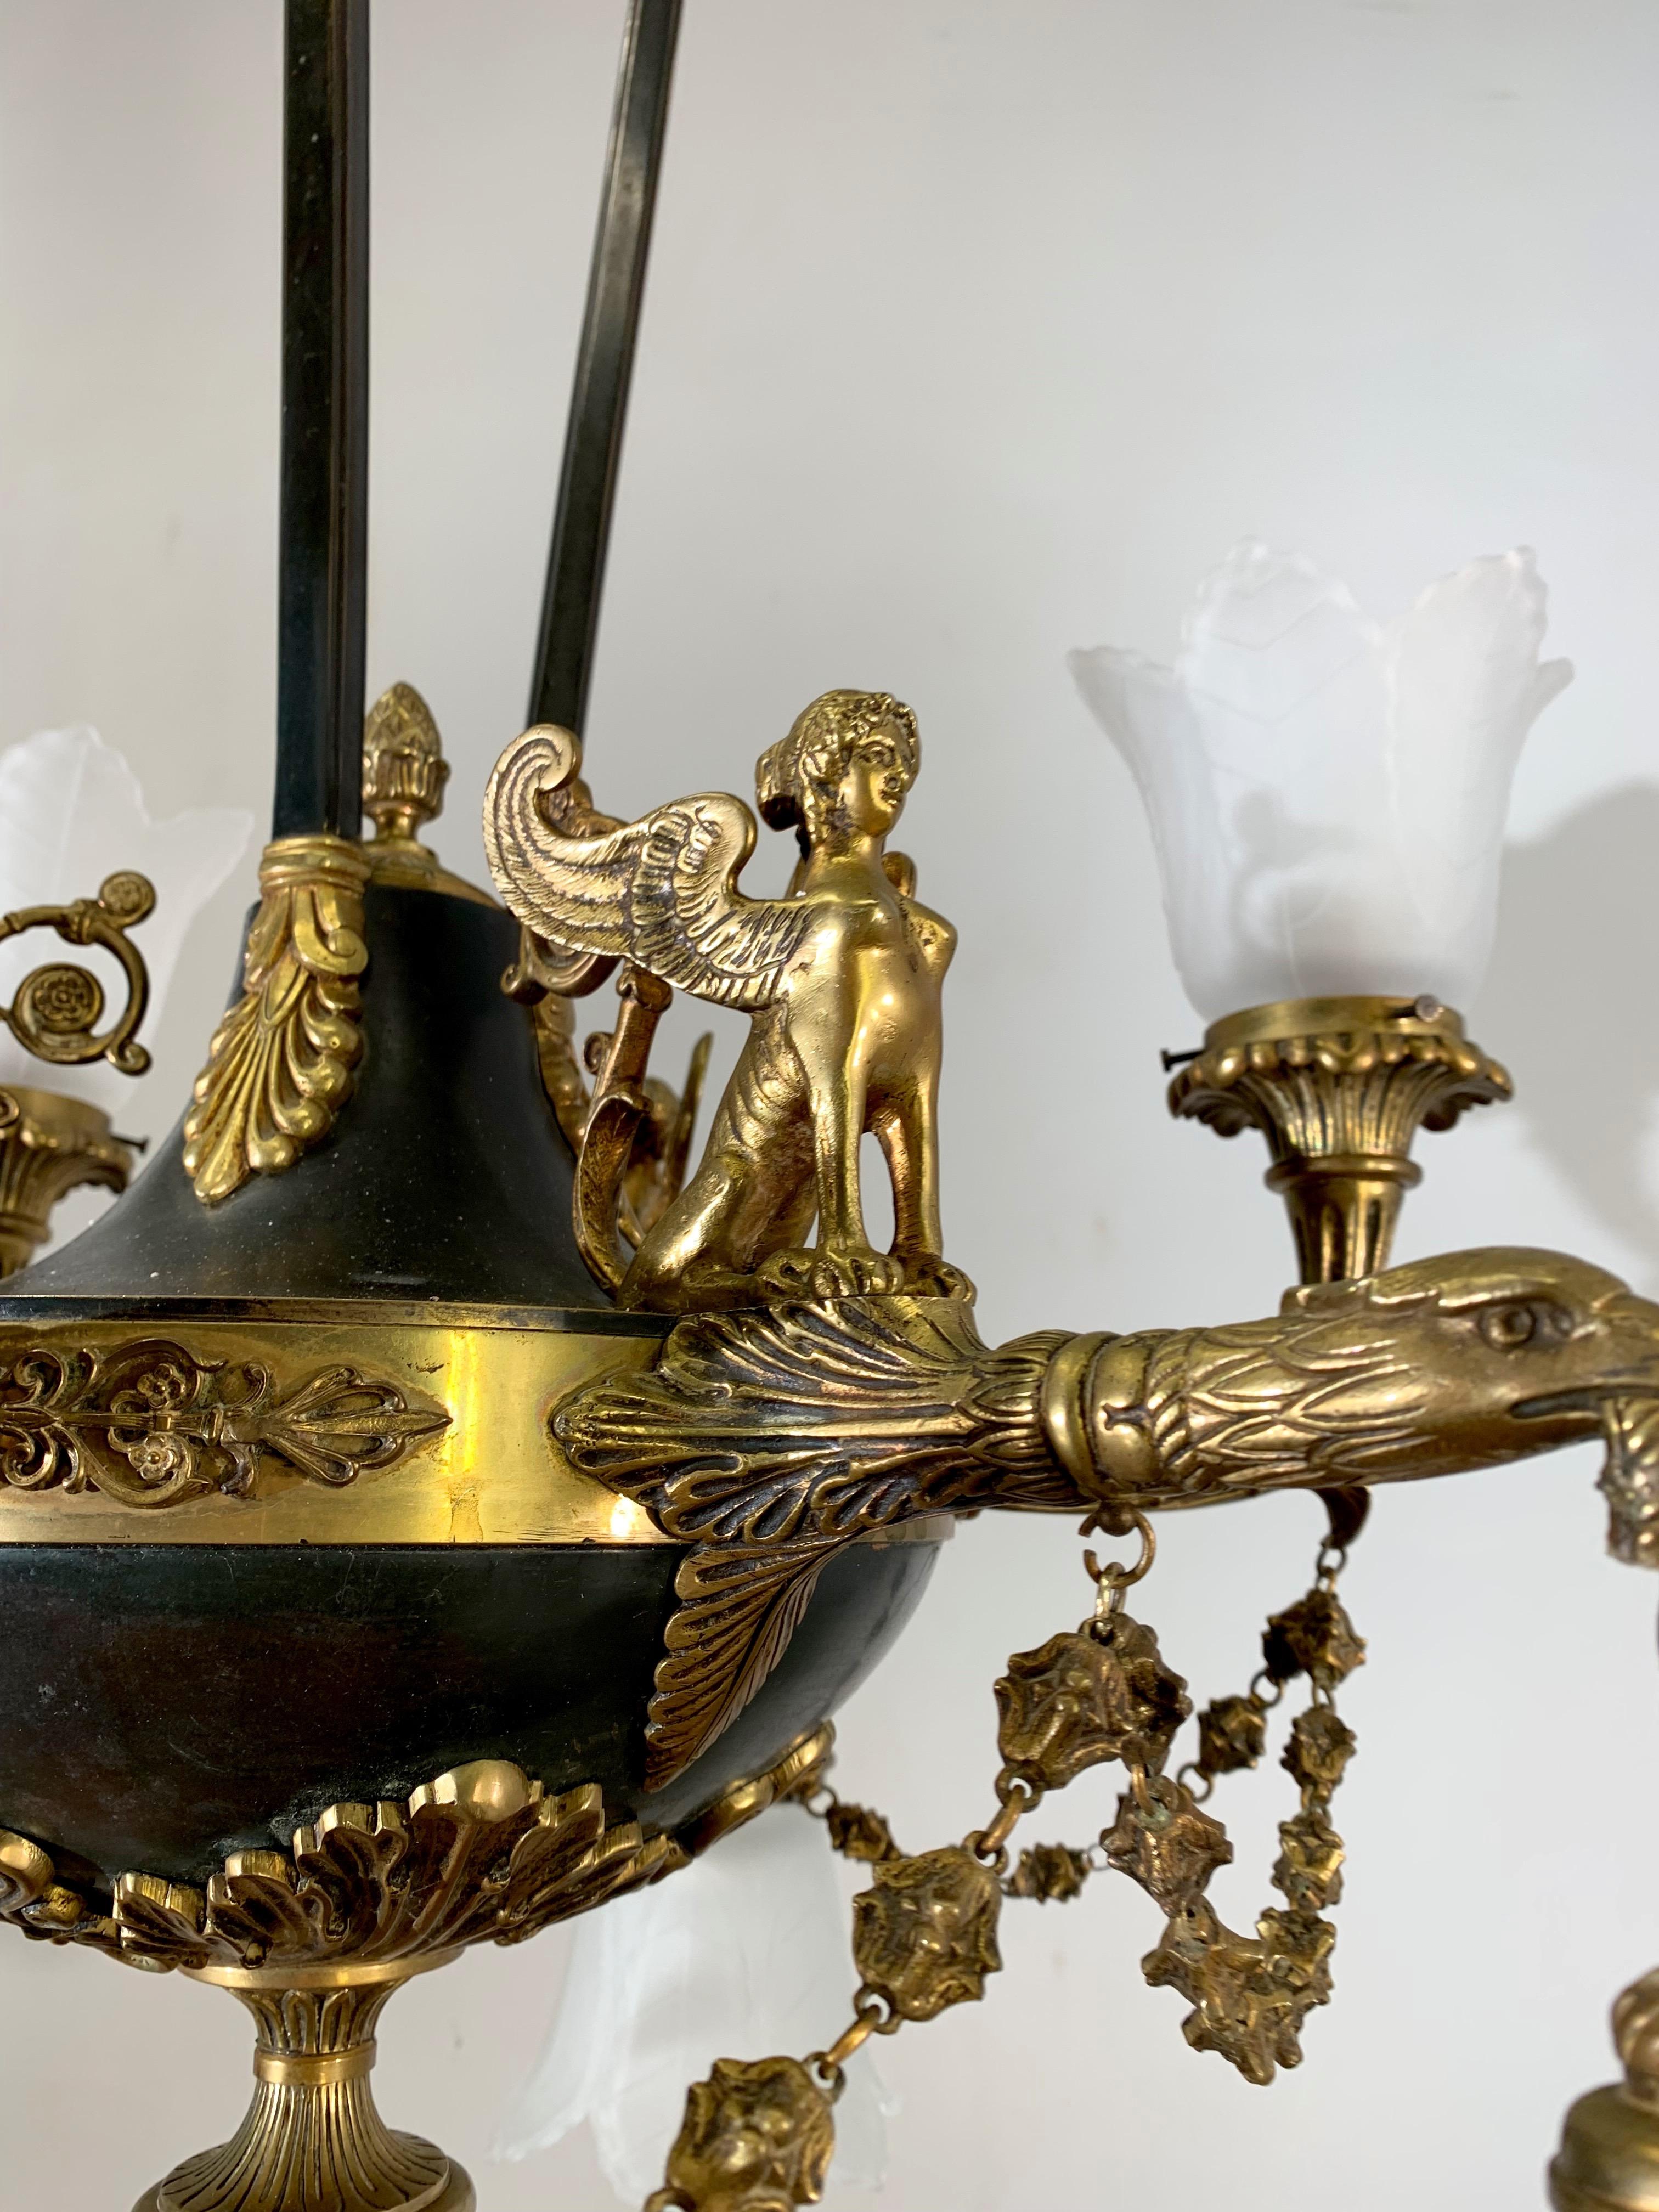 Empire Revival Antique French Empire Style Gilt Bronze Chandelier with Sphinx & Eagle Sculpture